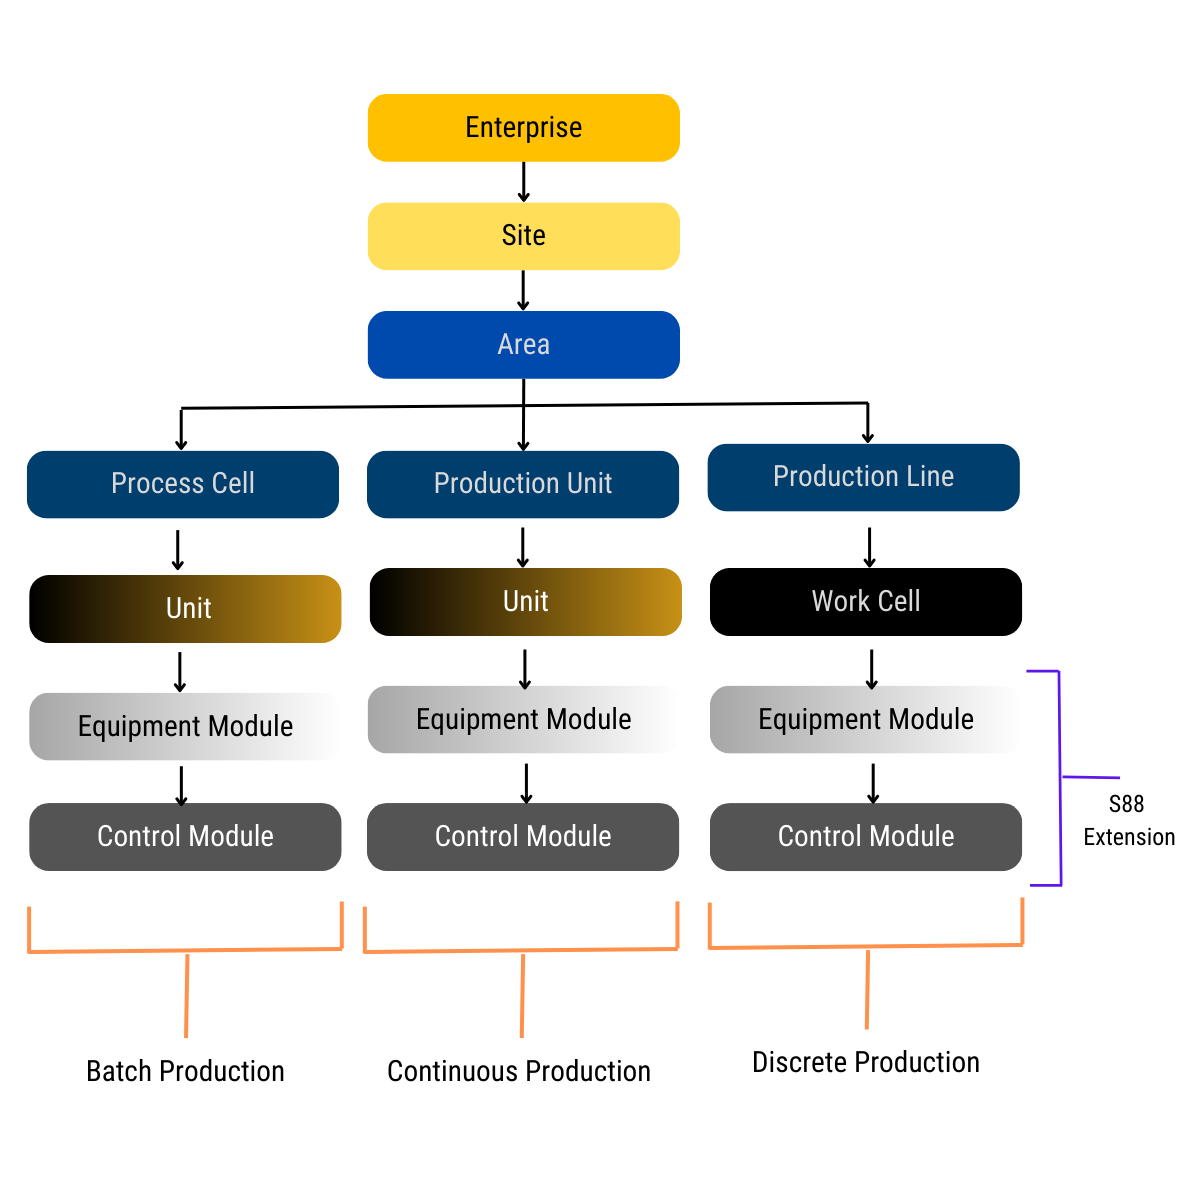 The Industrial Asset Model